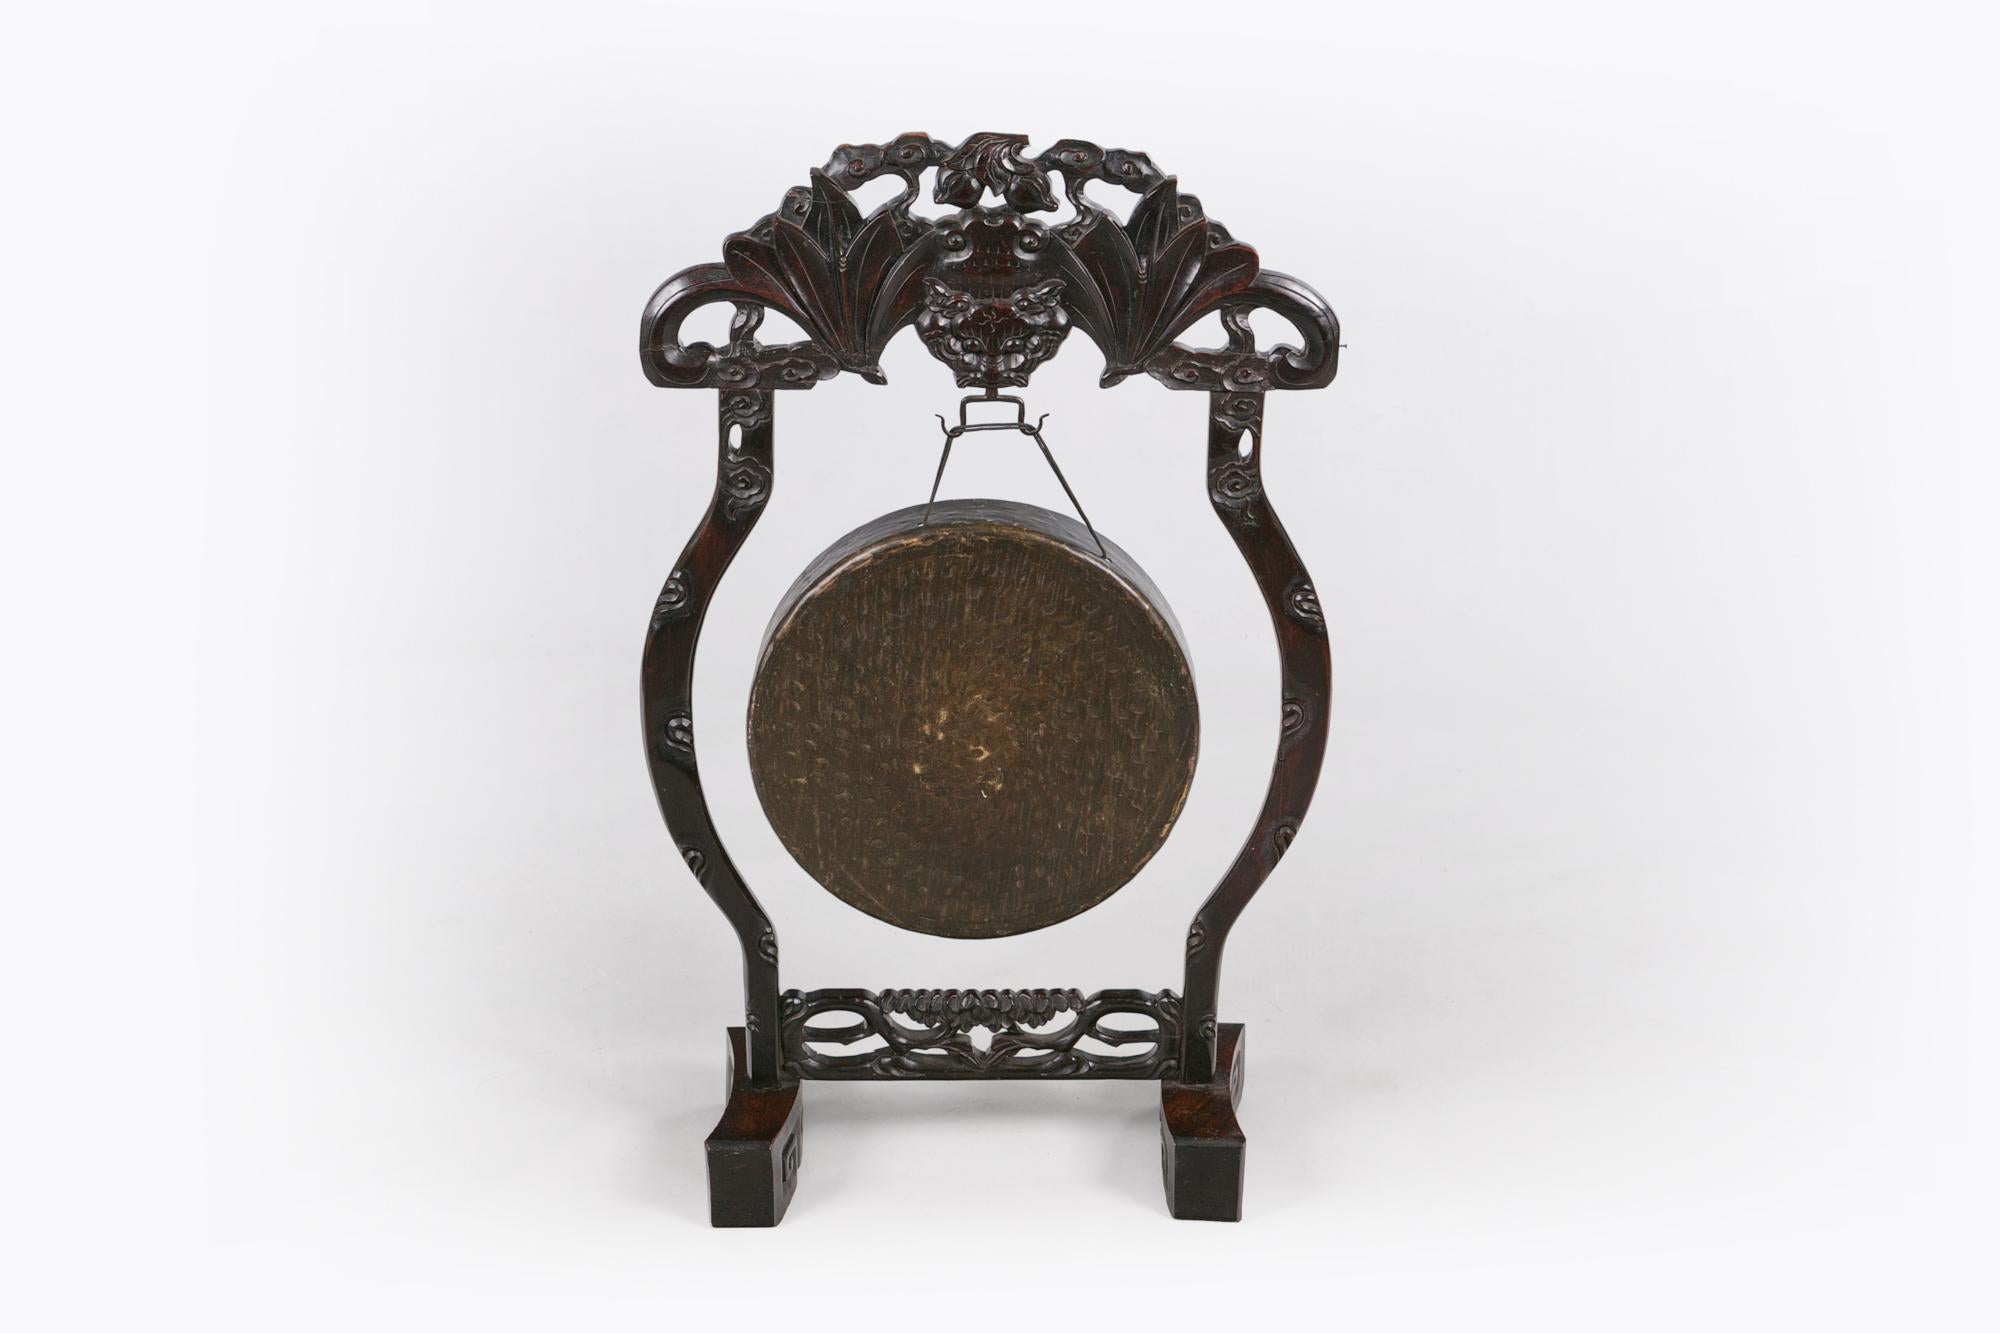 19th century Chinese Qing dynasty hand forged brushed bronze ceremonial temple gong of circular form mounted on ornately carved cherrywood stand. The finely carved and pierced hardwood frame surmounted with foliate cartouche raised over suspended